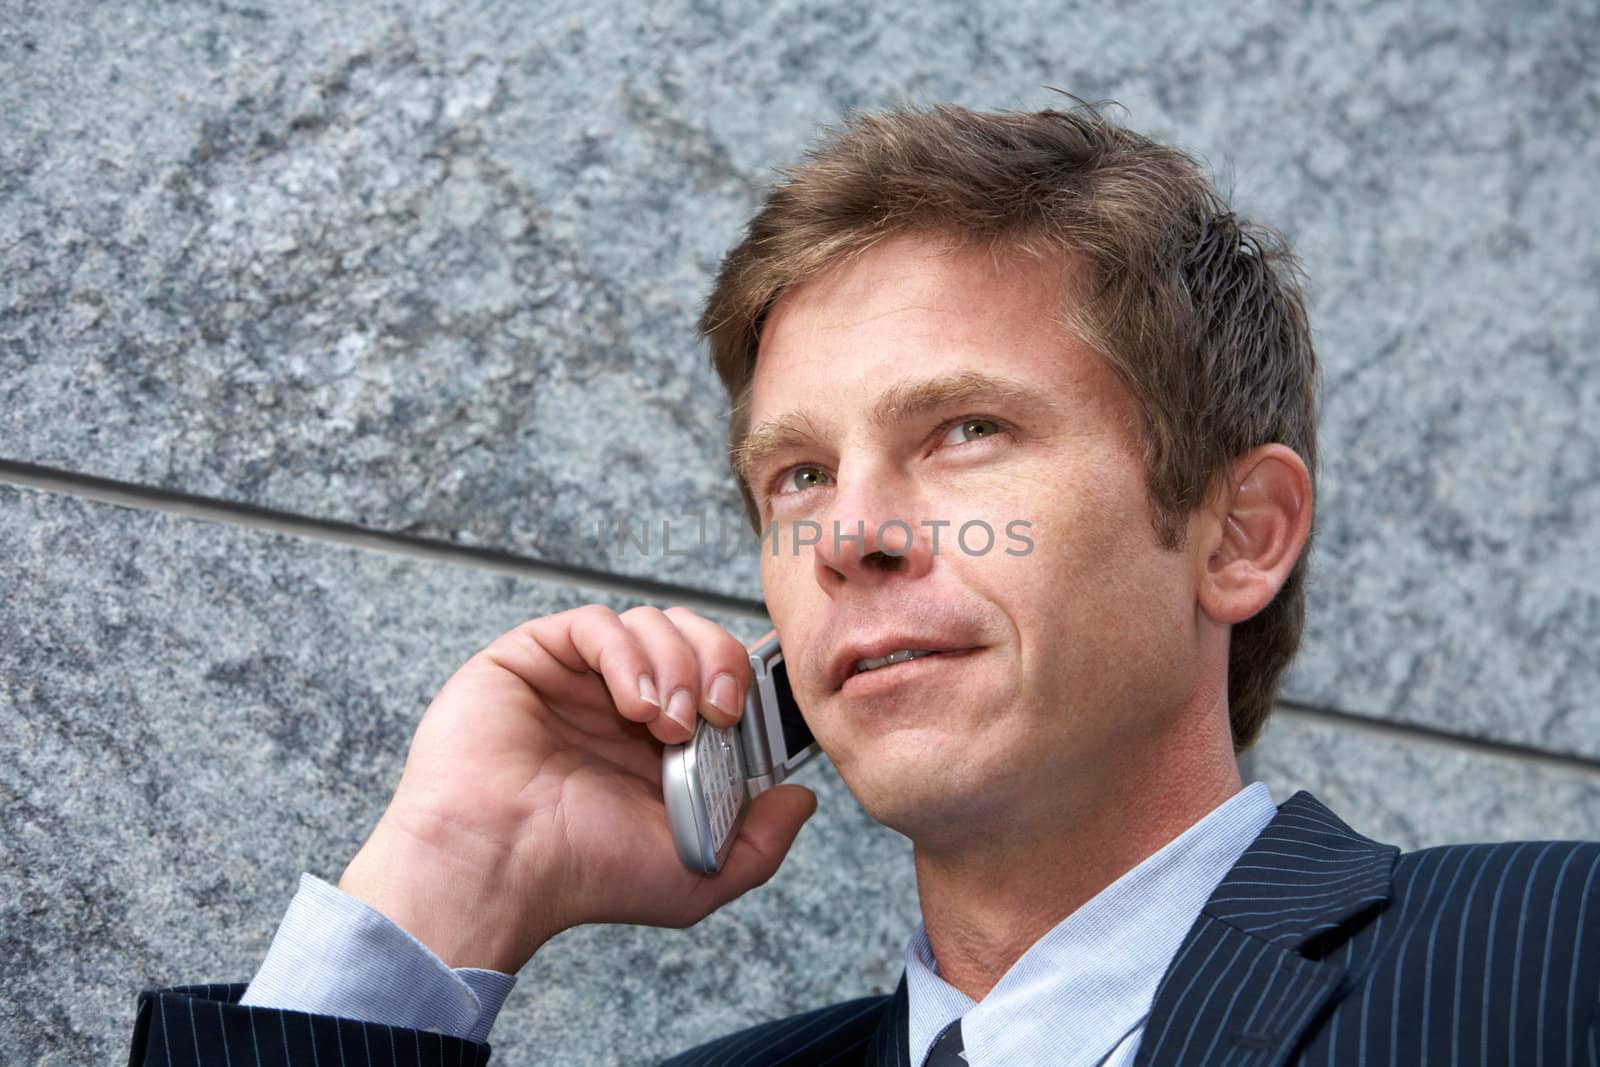 Man on cell phone by building wall, low angle close-up